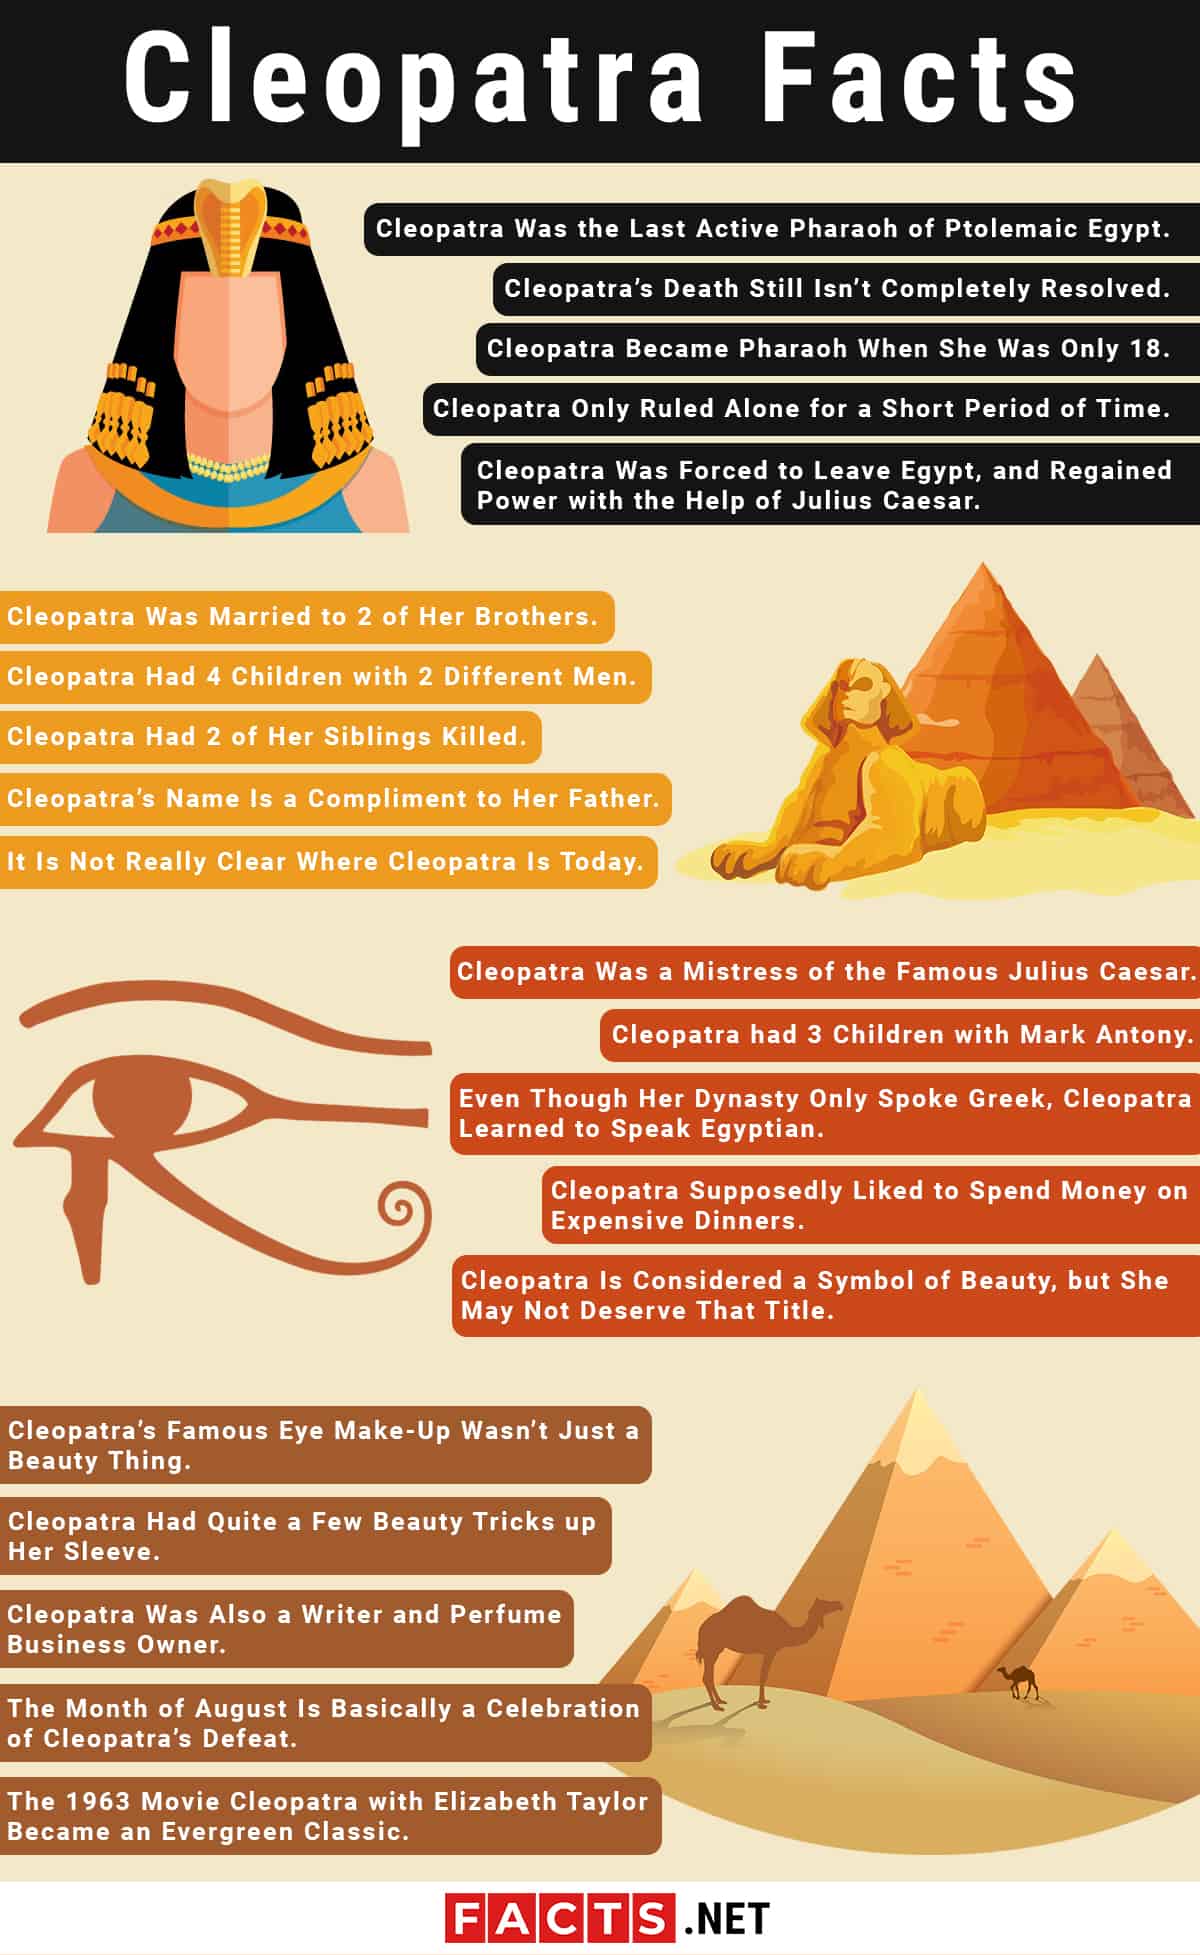 Top 20 Cleopatra Facts - Reign, History, Death & More | Facts.net